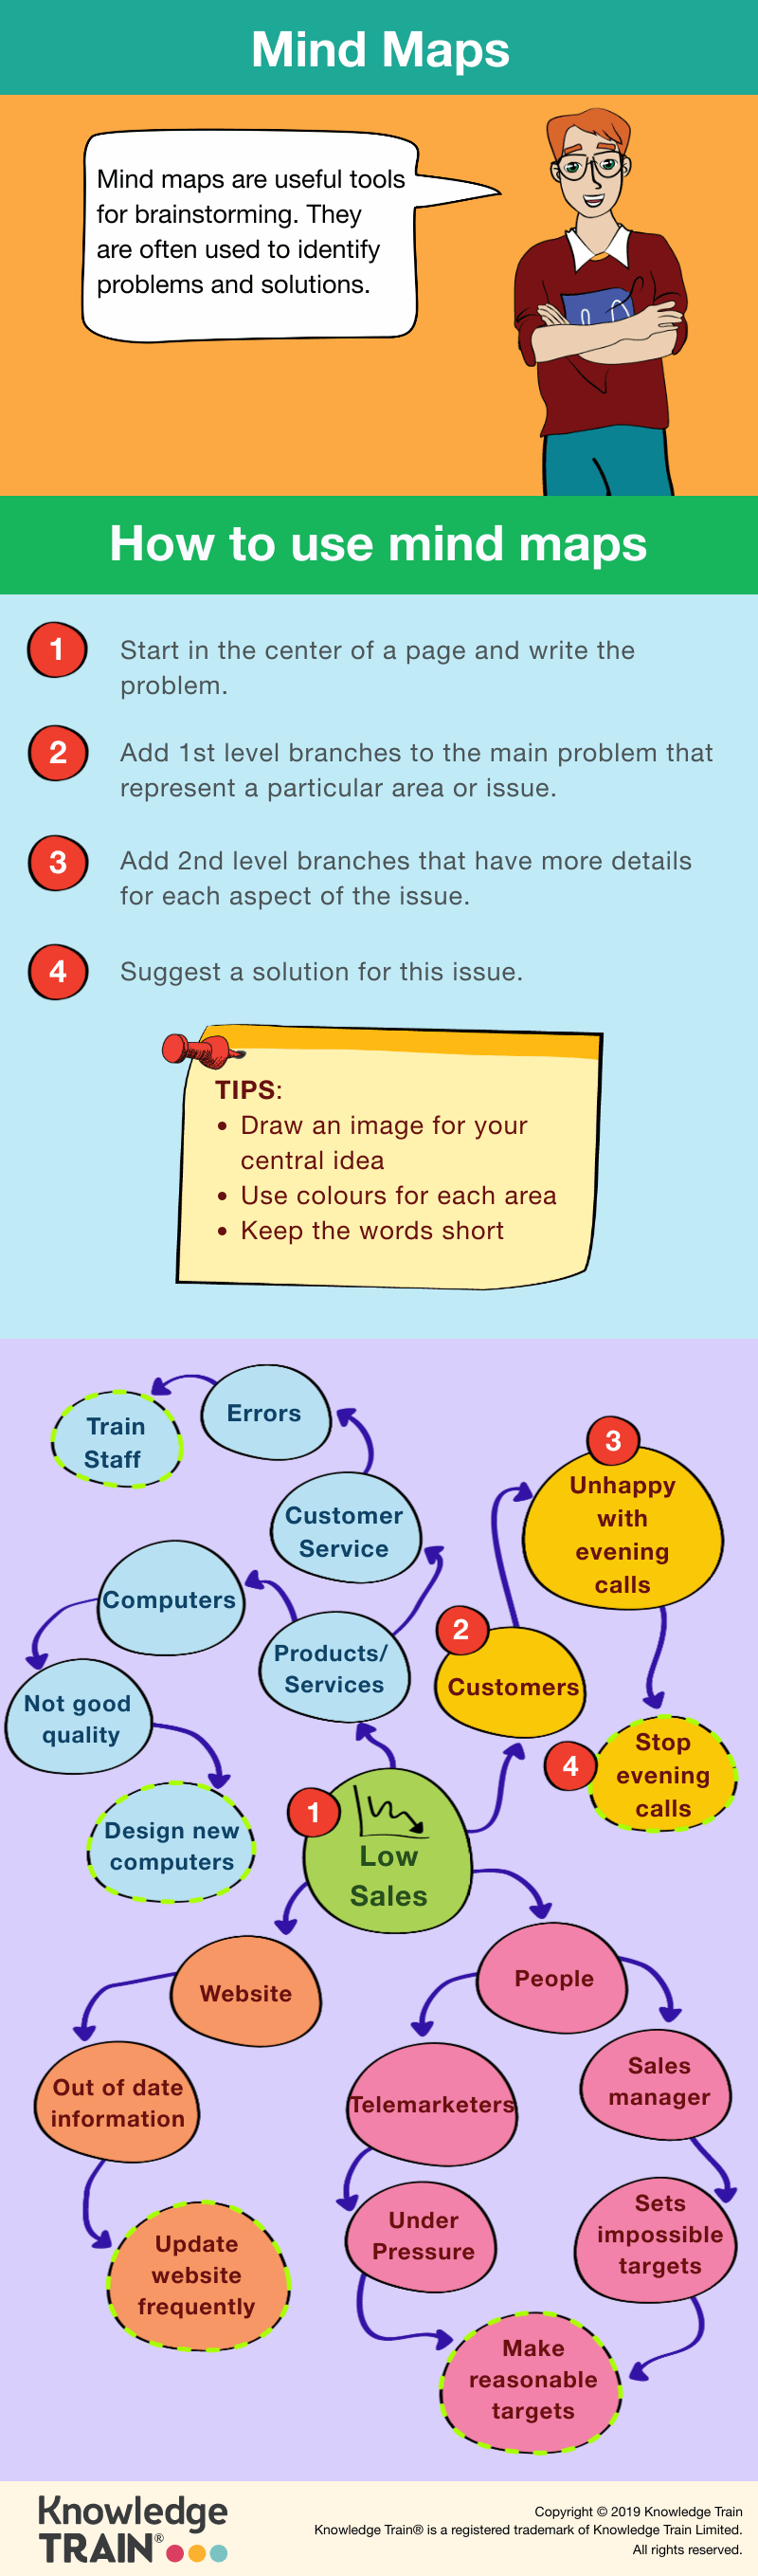 Mind maps business analysis technique infographic.